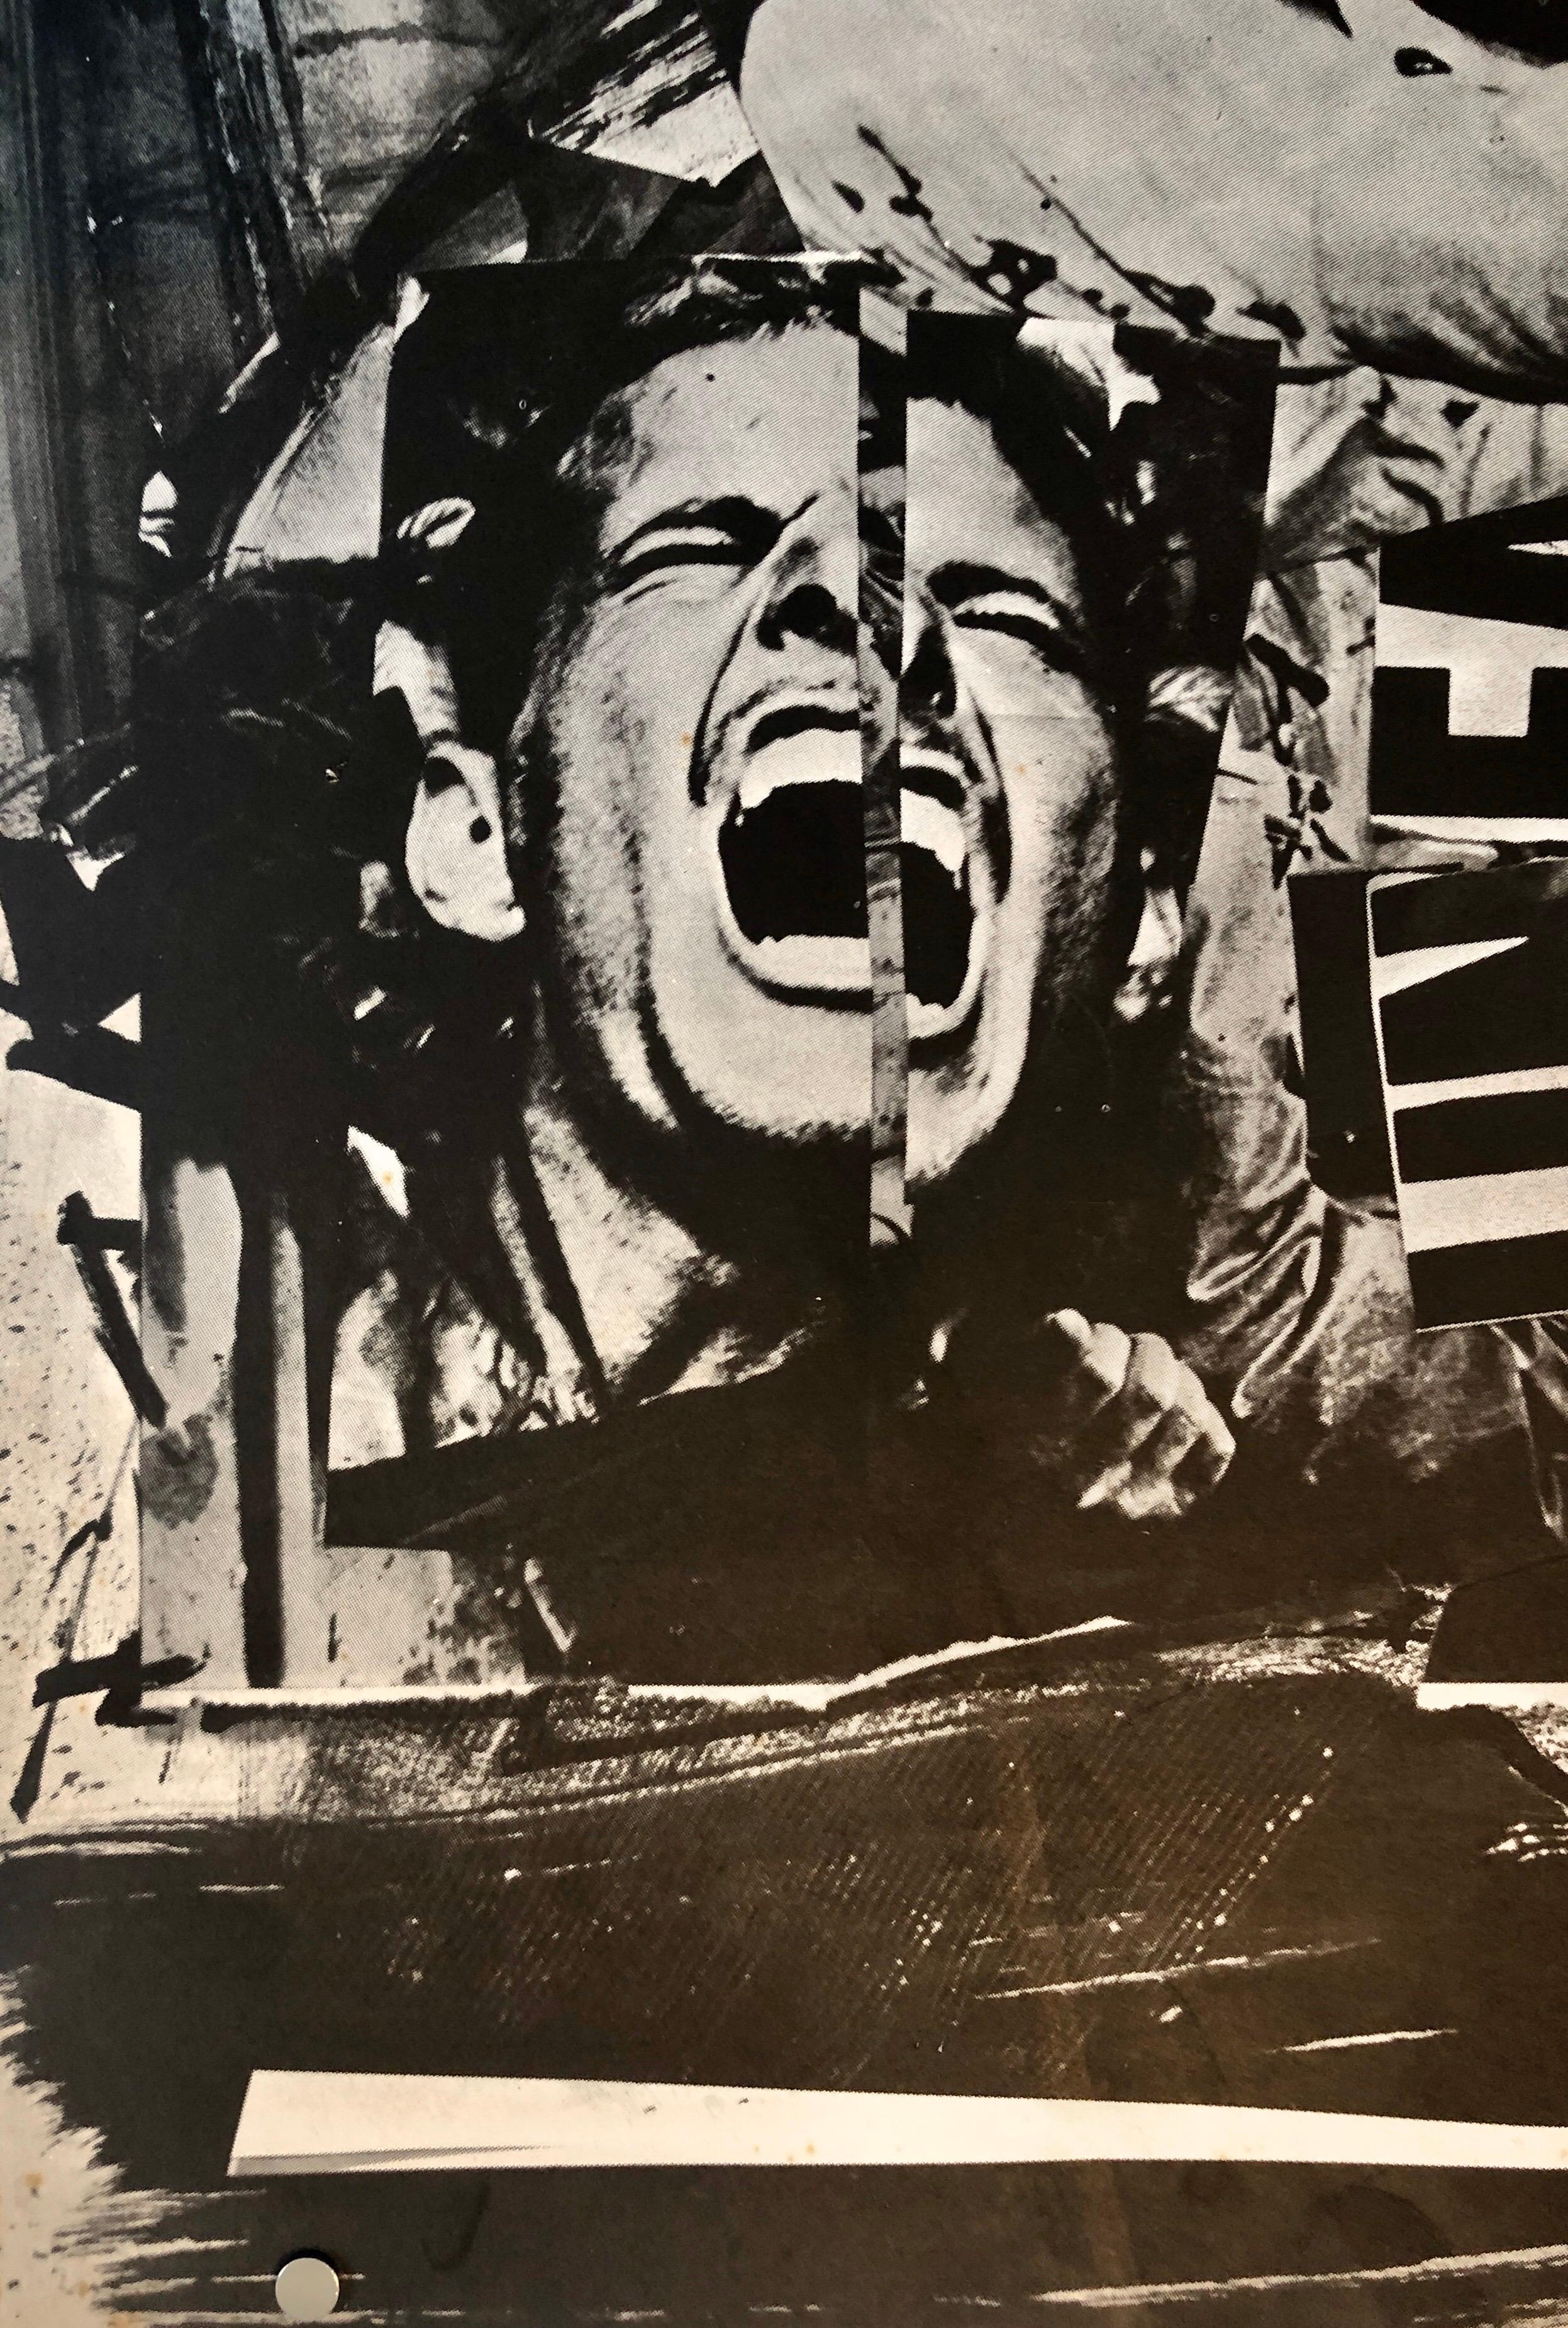 Emilio Vedova (b.1919, Venice Italy) Screenprint lithograph. Offset lithograph in black and white on wove paper.
Artist signed in marker across back back,
Screenprint newspaper collage of political events around 1968 uprisings.

Emilio Vedova (9